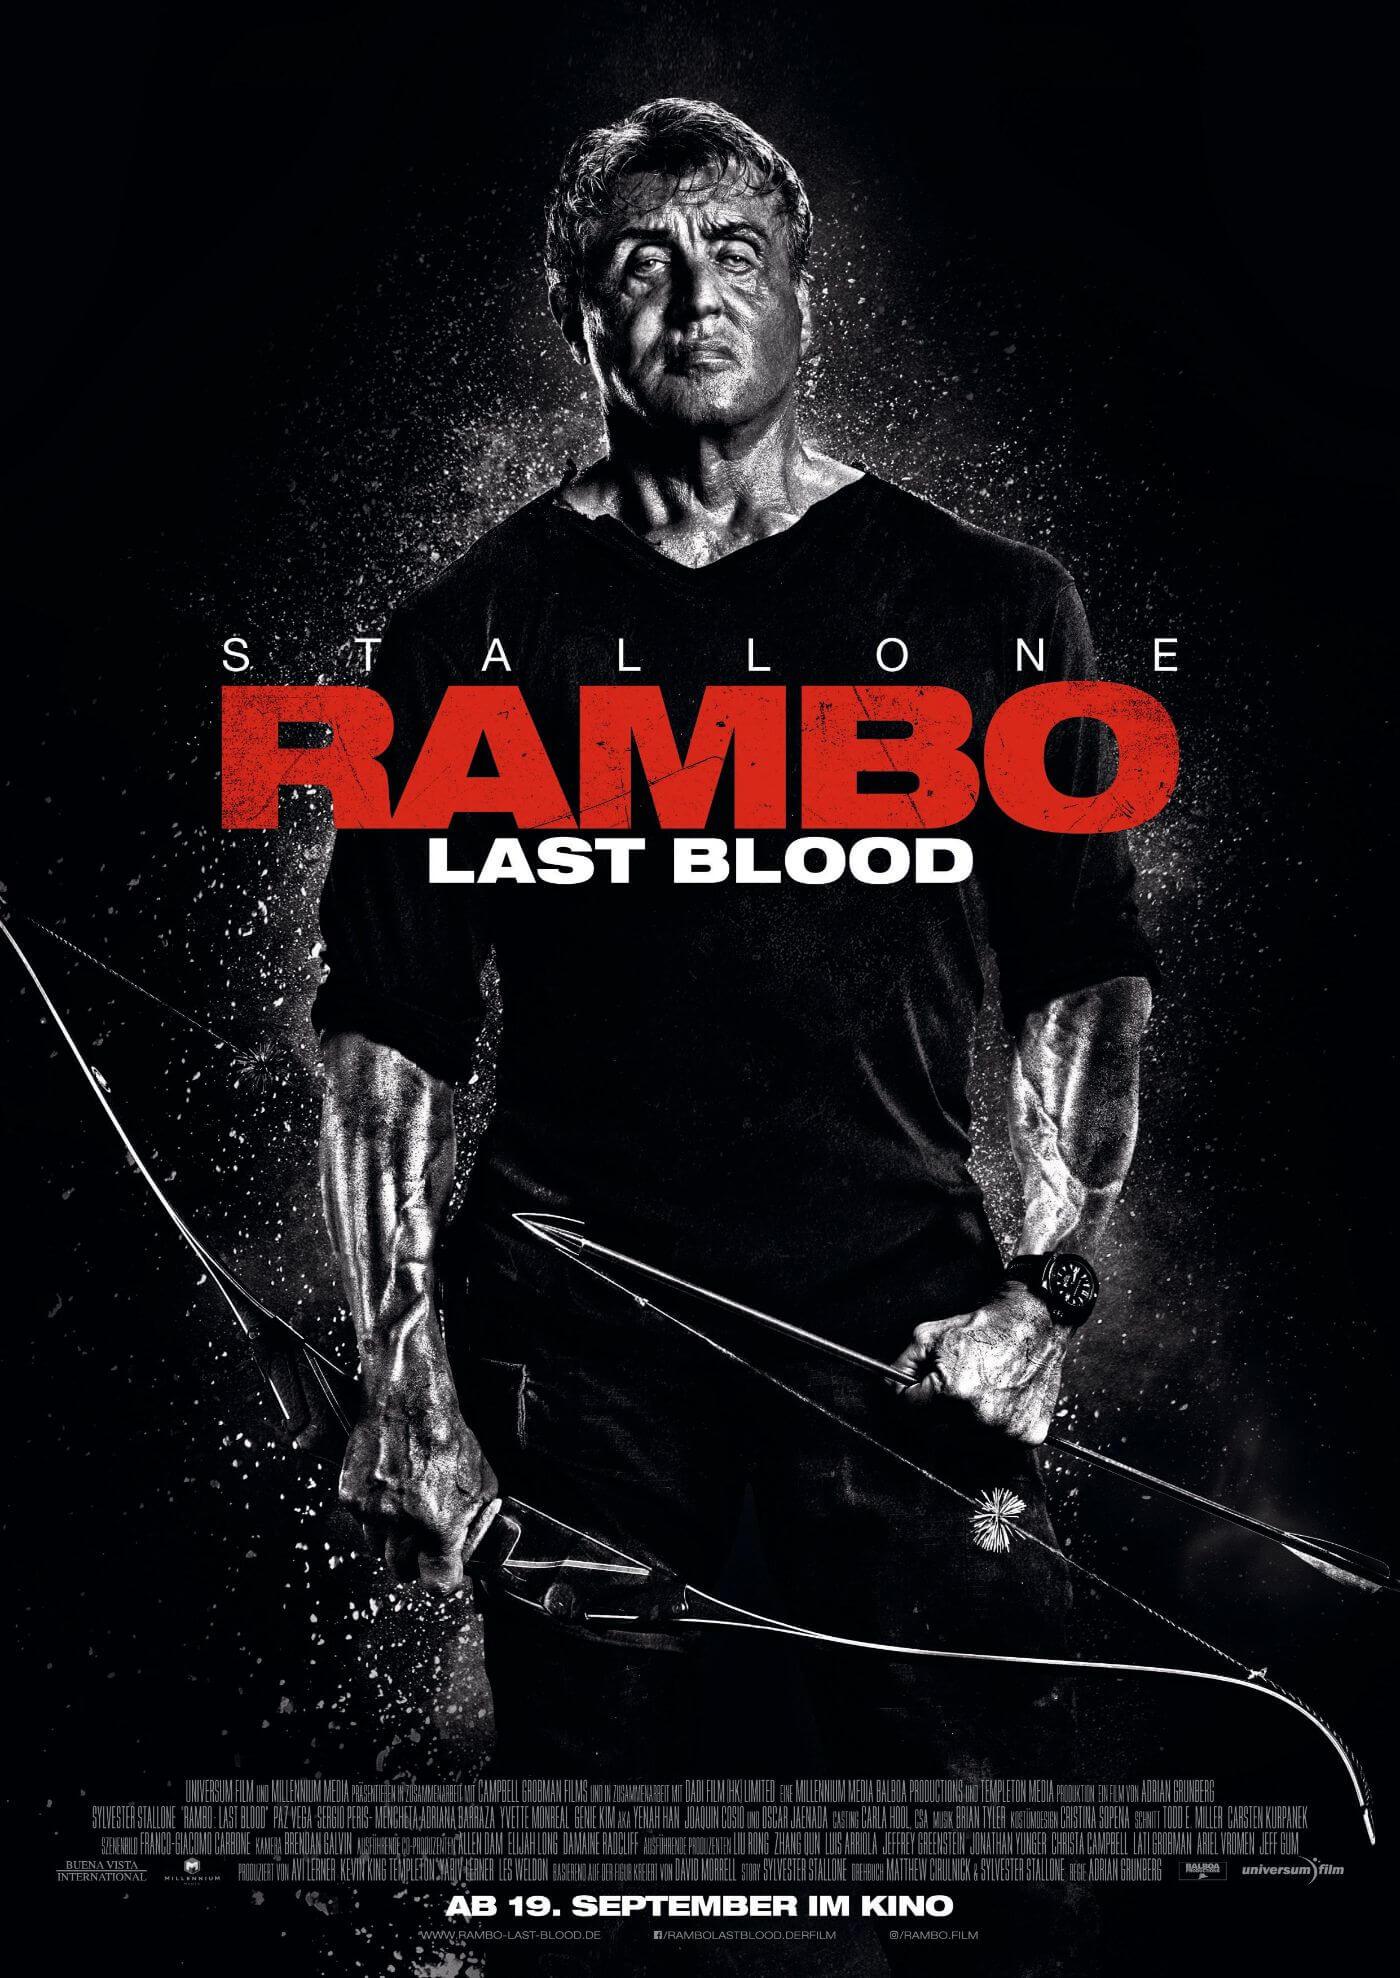 Rambo Last Blood Sylvester Sallone Hollywood English Action Movie Poster Life Size Posters By Brad Buy Posters Frames Canvas Digital Art Prints Small Compact Medium And Large Variants